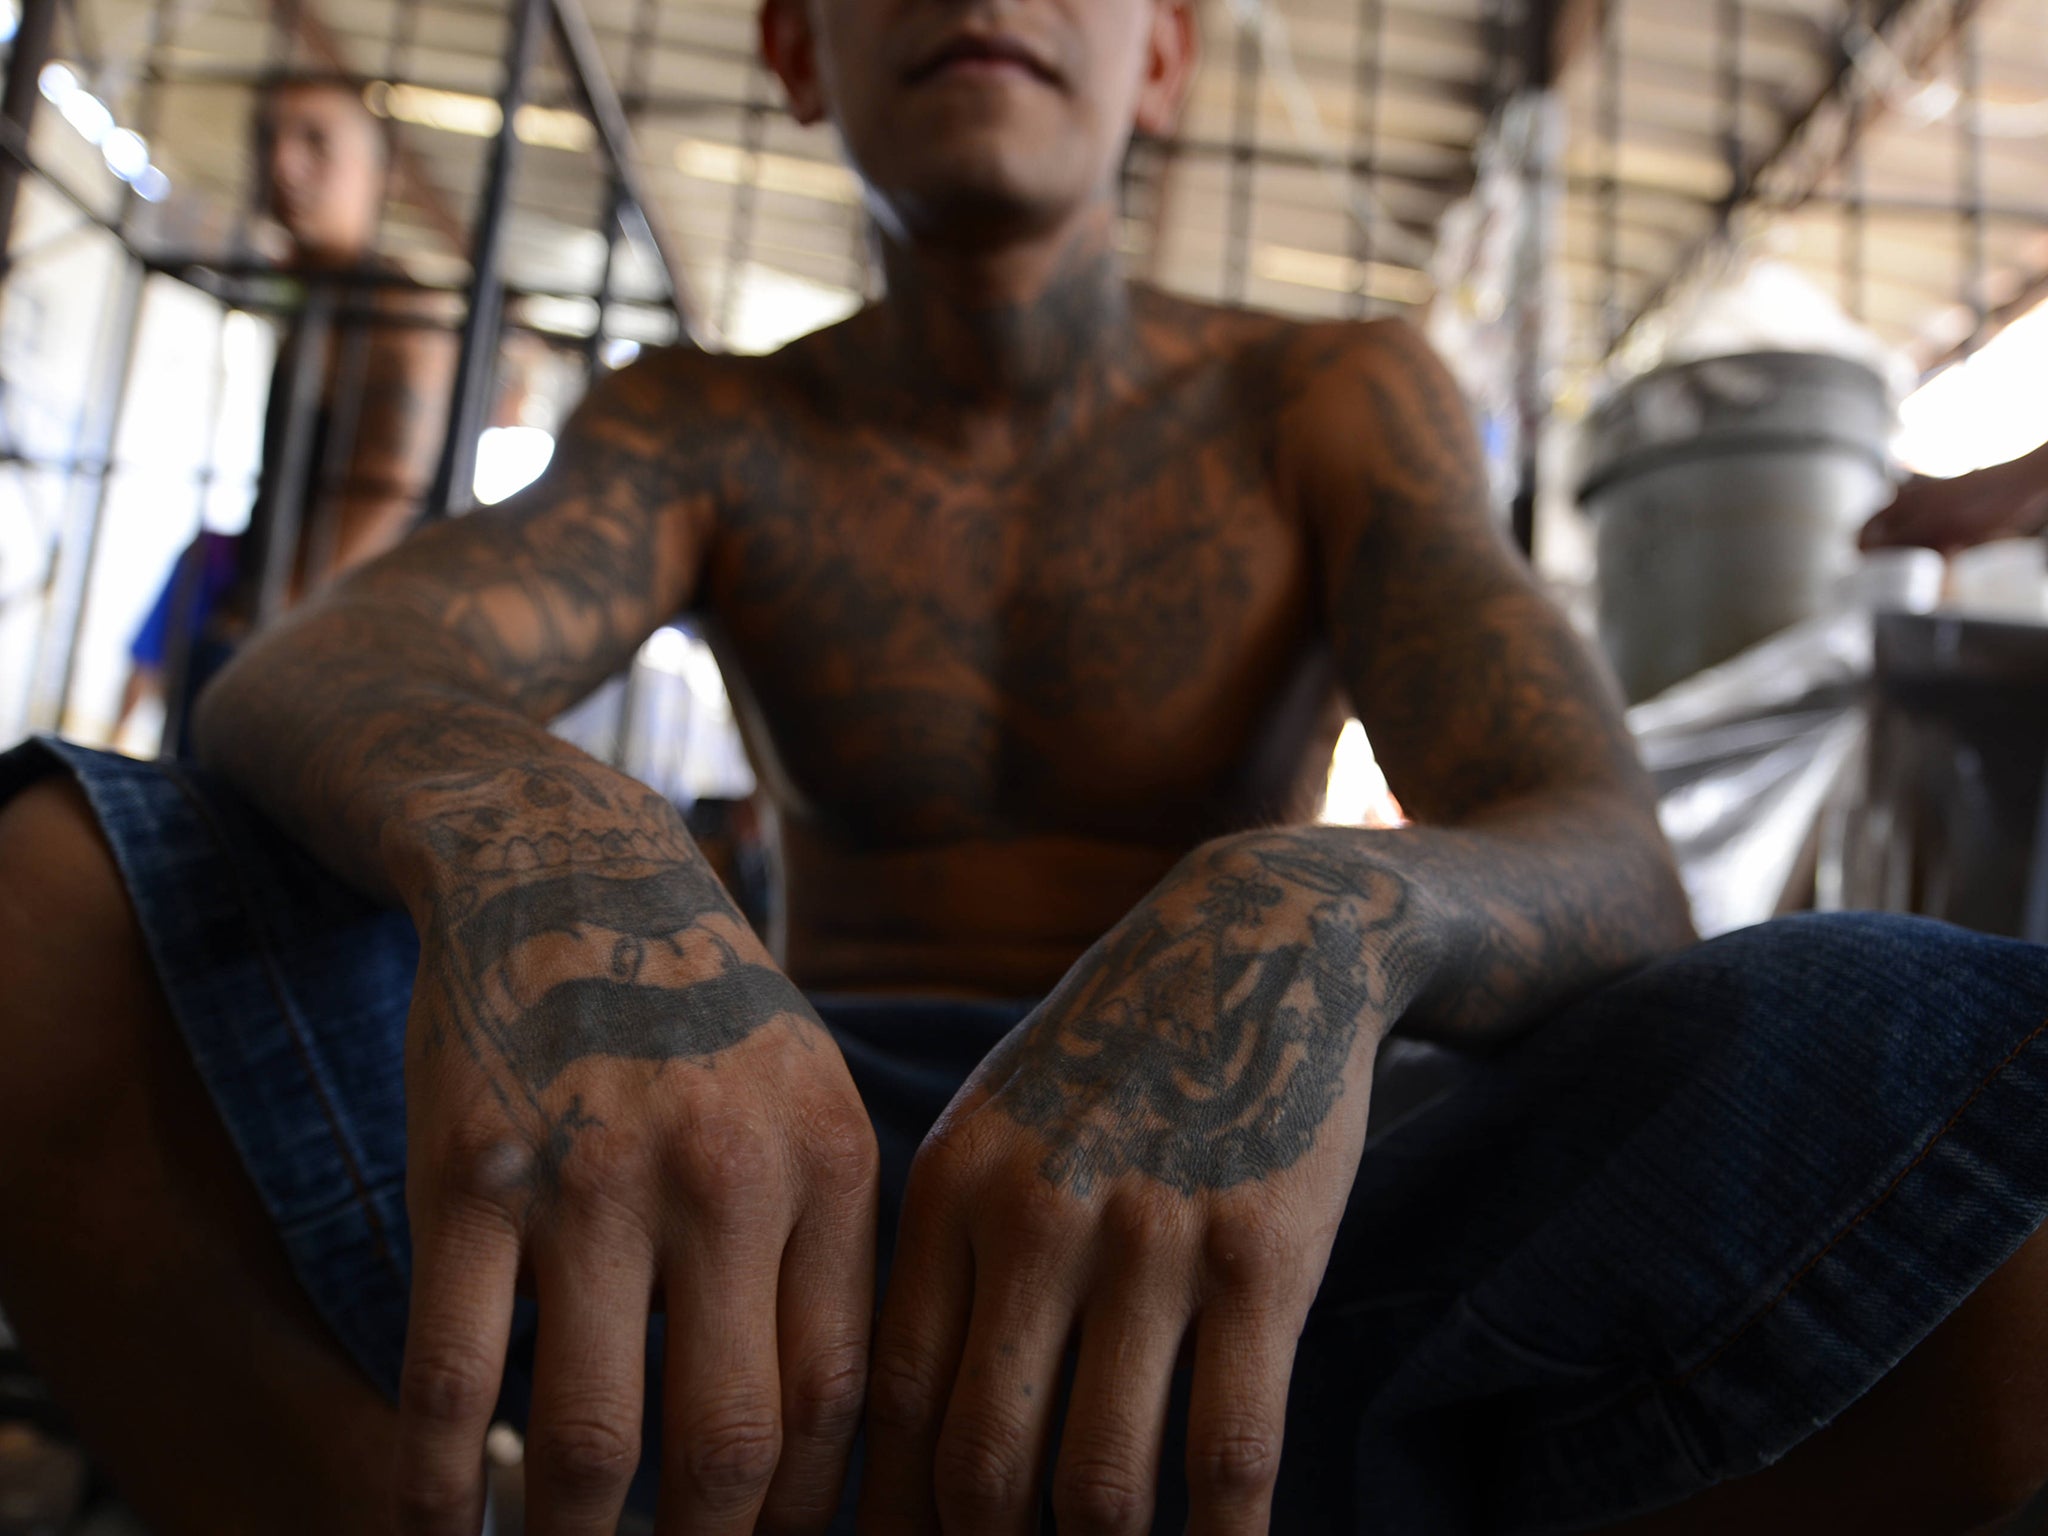 Trump administration calls for death penalty over MS-13 gang accused of mur...